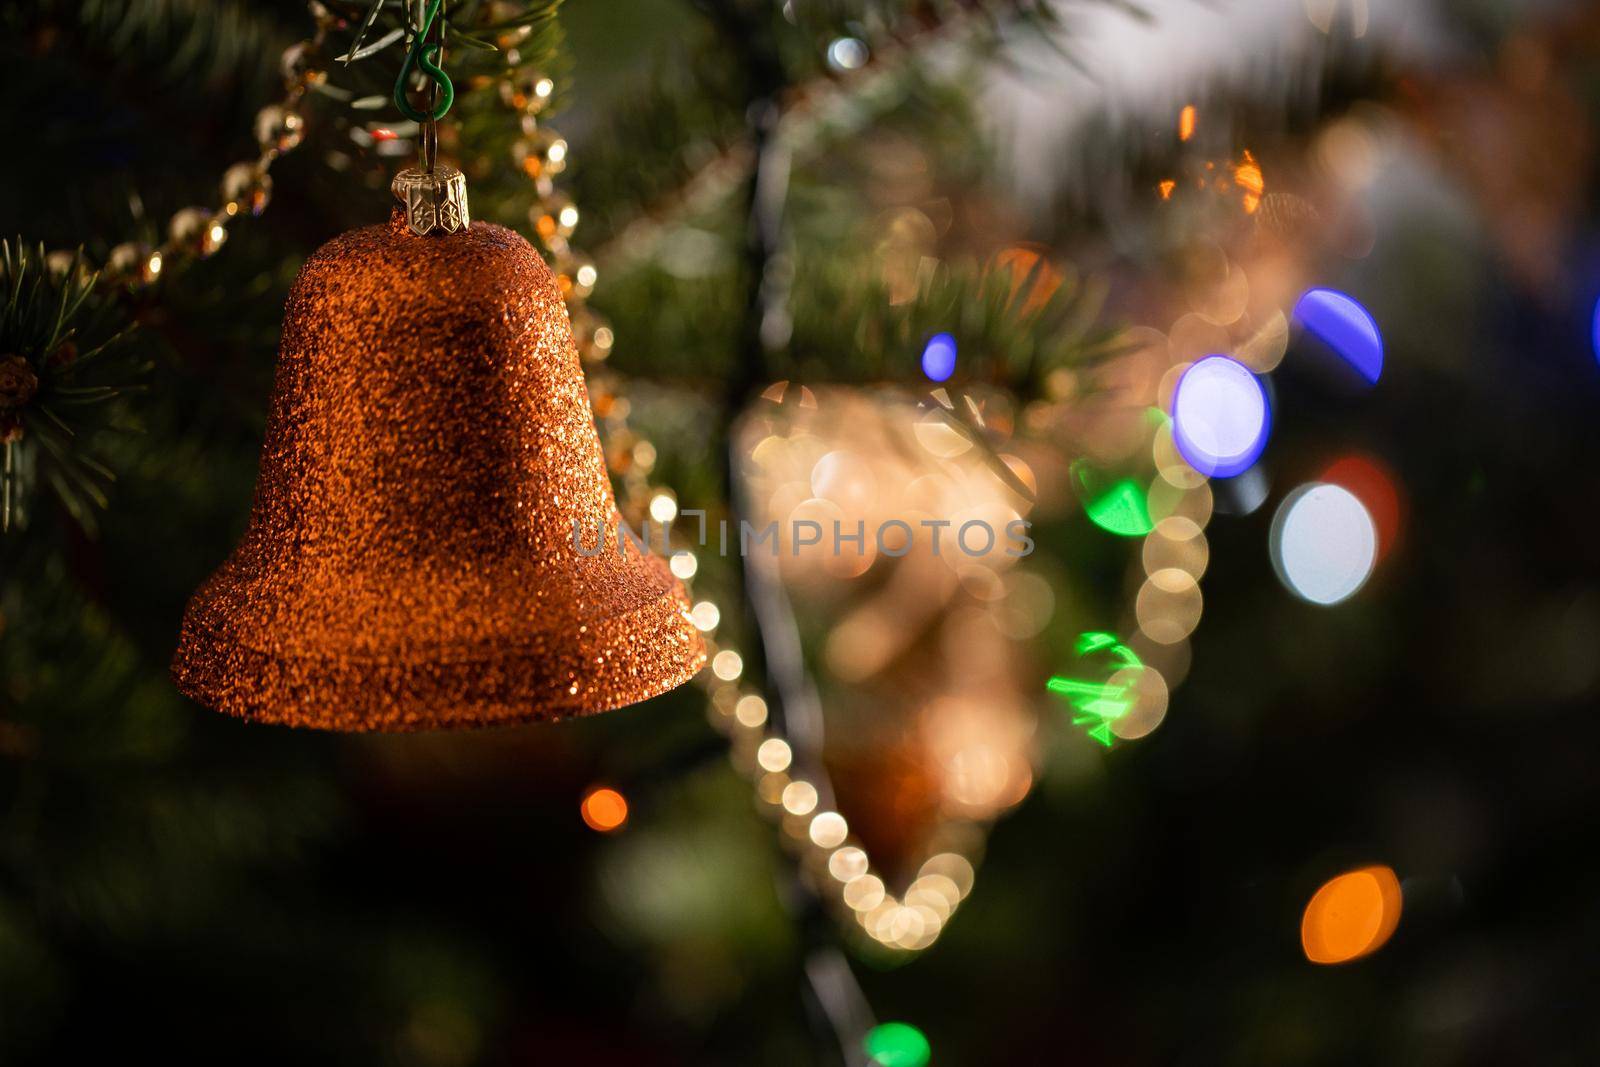 A shiny bell-shaped ornament attached to a Christmas tree in the background with cortical lights.